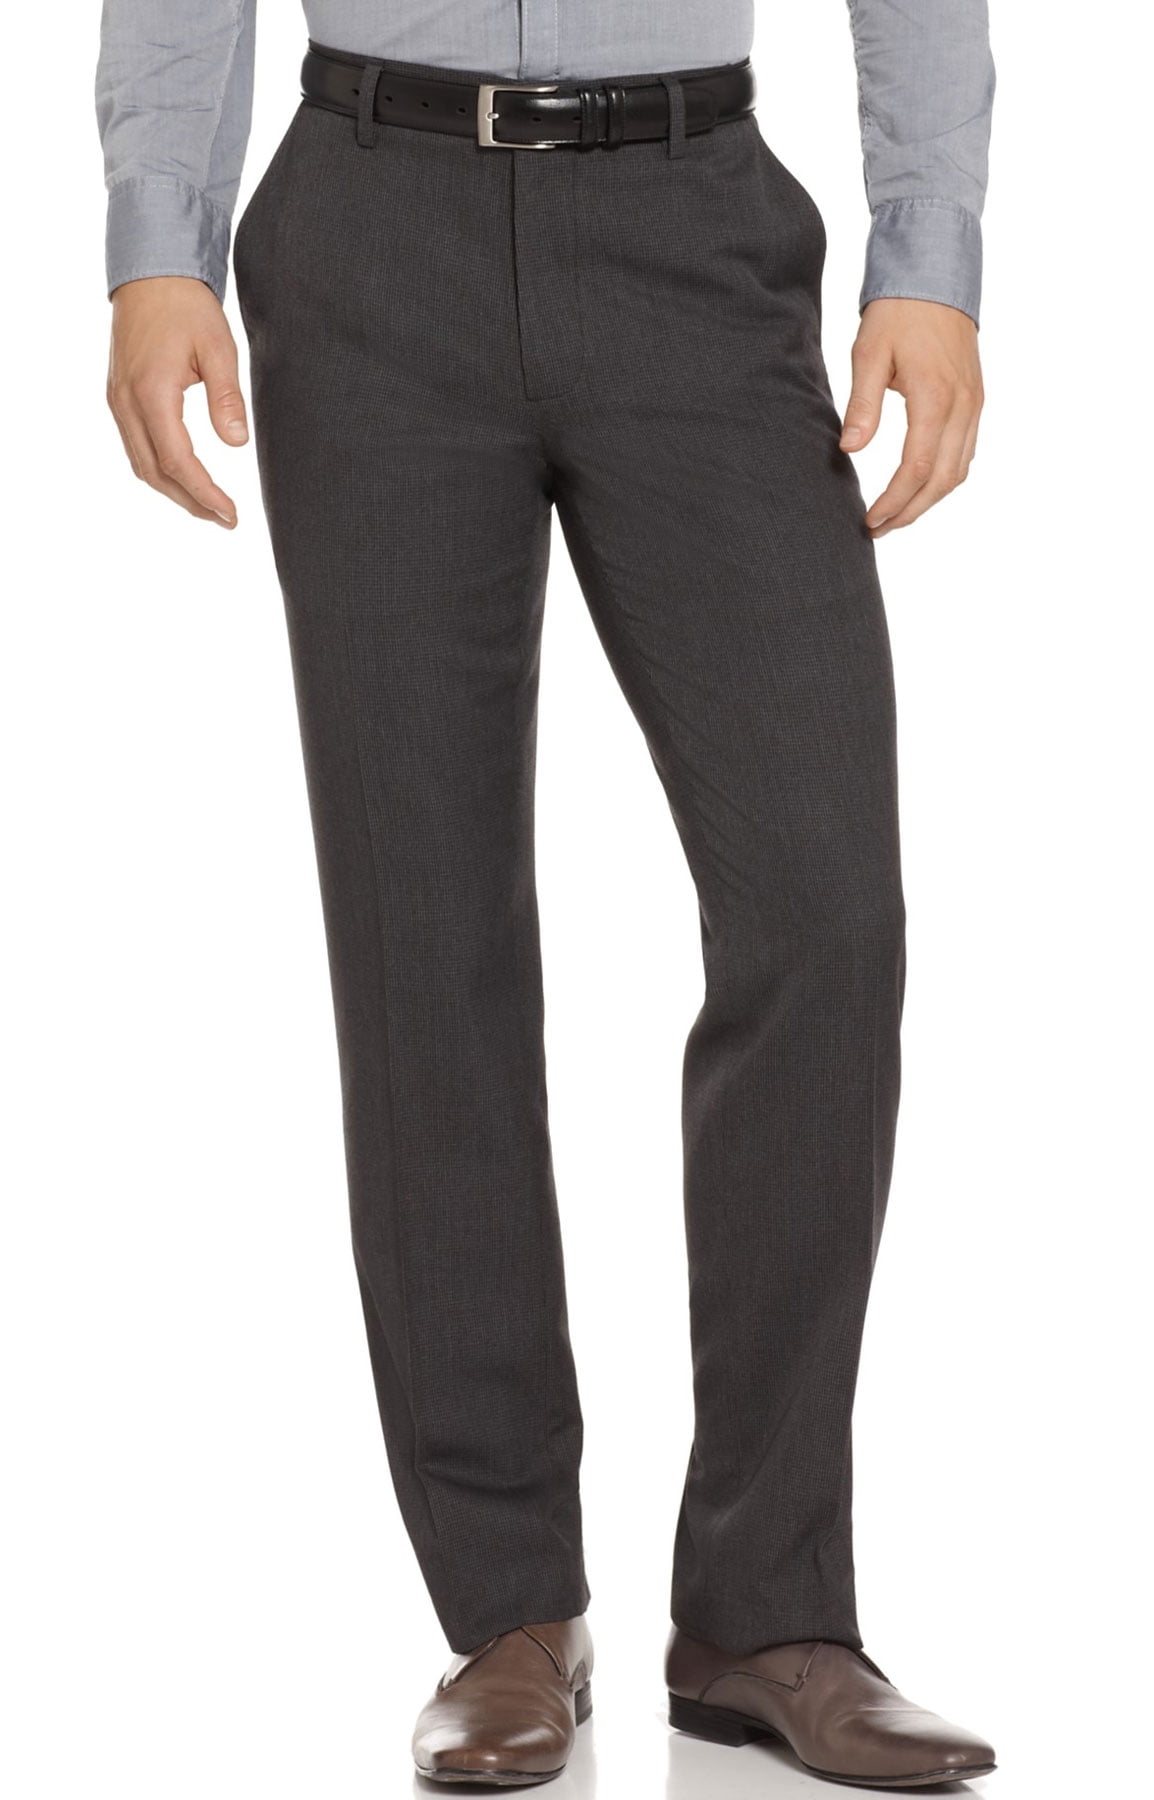 Kenneth Cole - KENNETH COLE Reaction Mens Flat Front Dress Pants ...